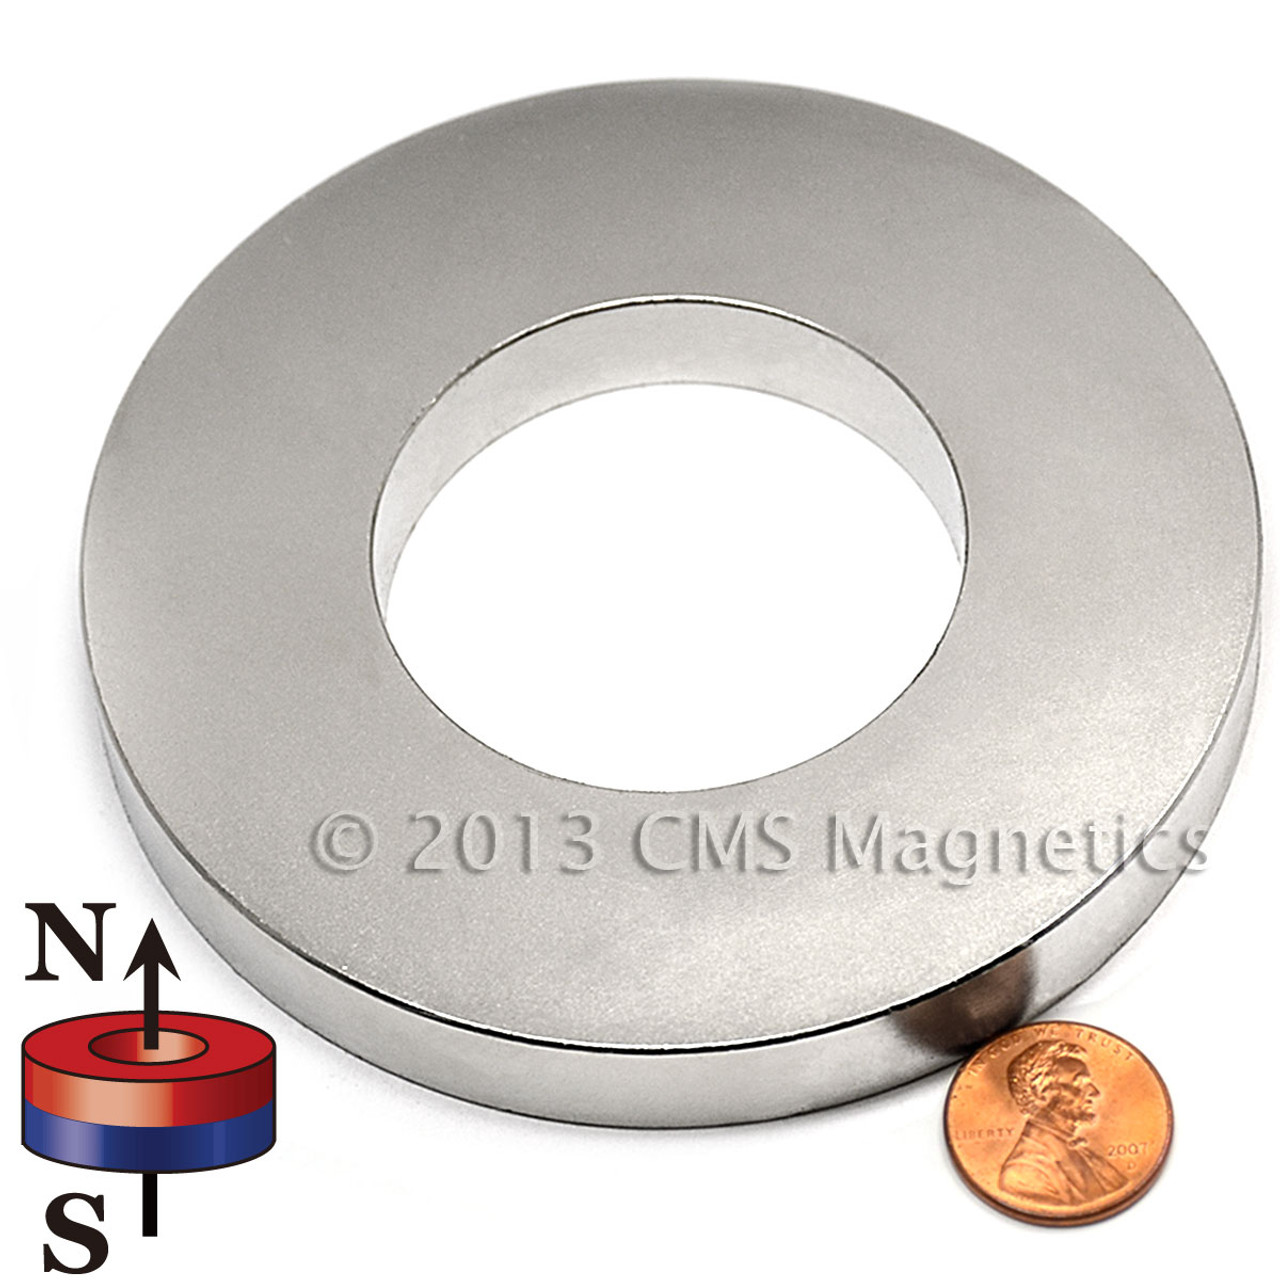 Details about   3.5” Round Heavy Duty Magnets 1/4-20 Thread N45 Rig wheels Style Rigwheels 